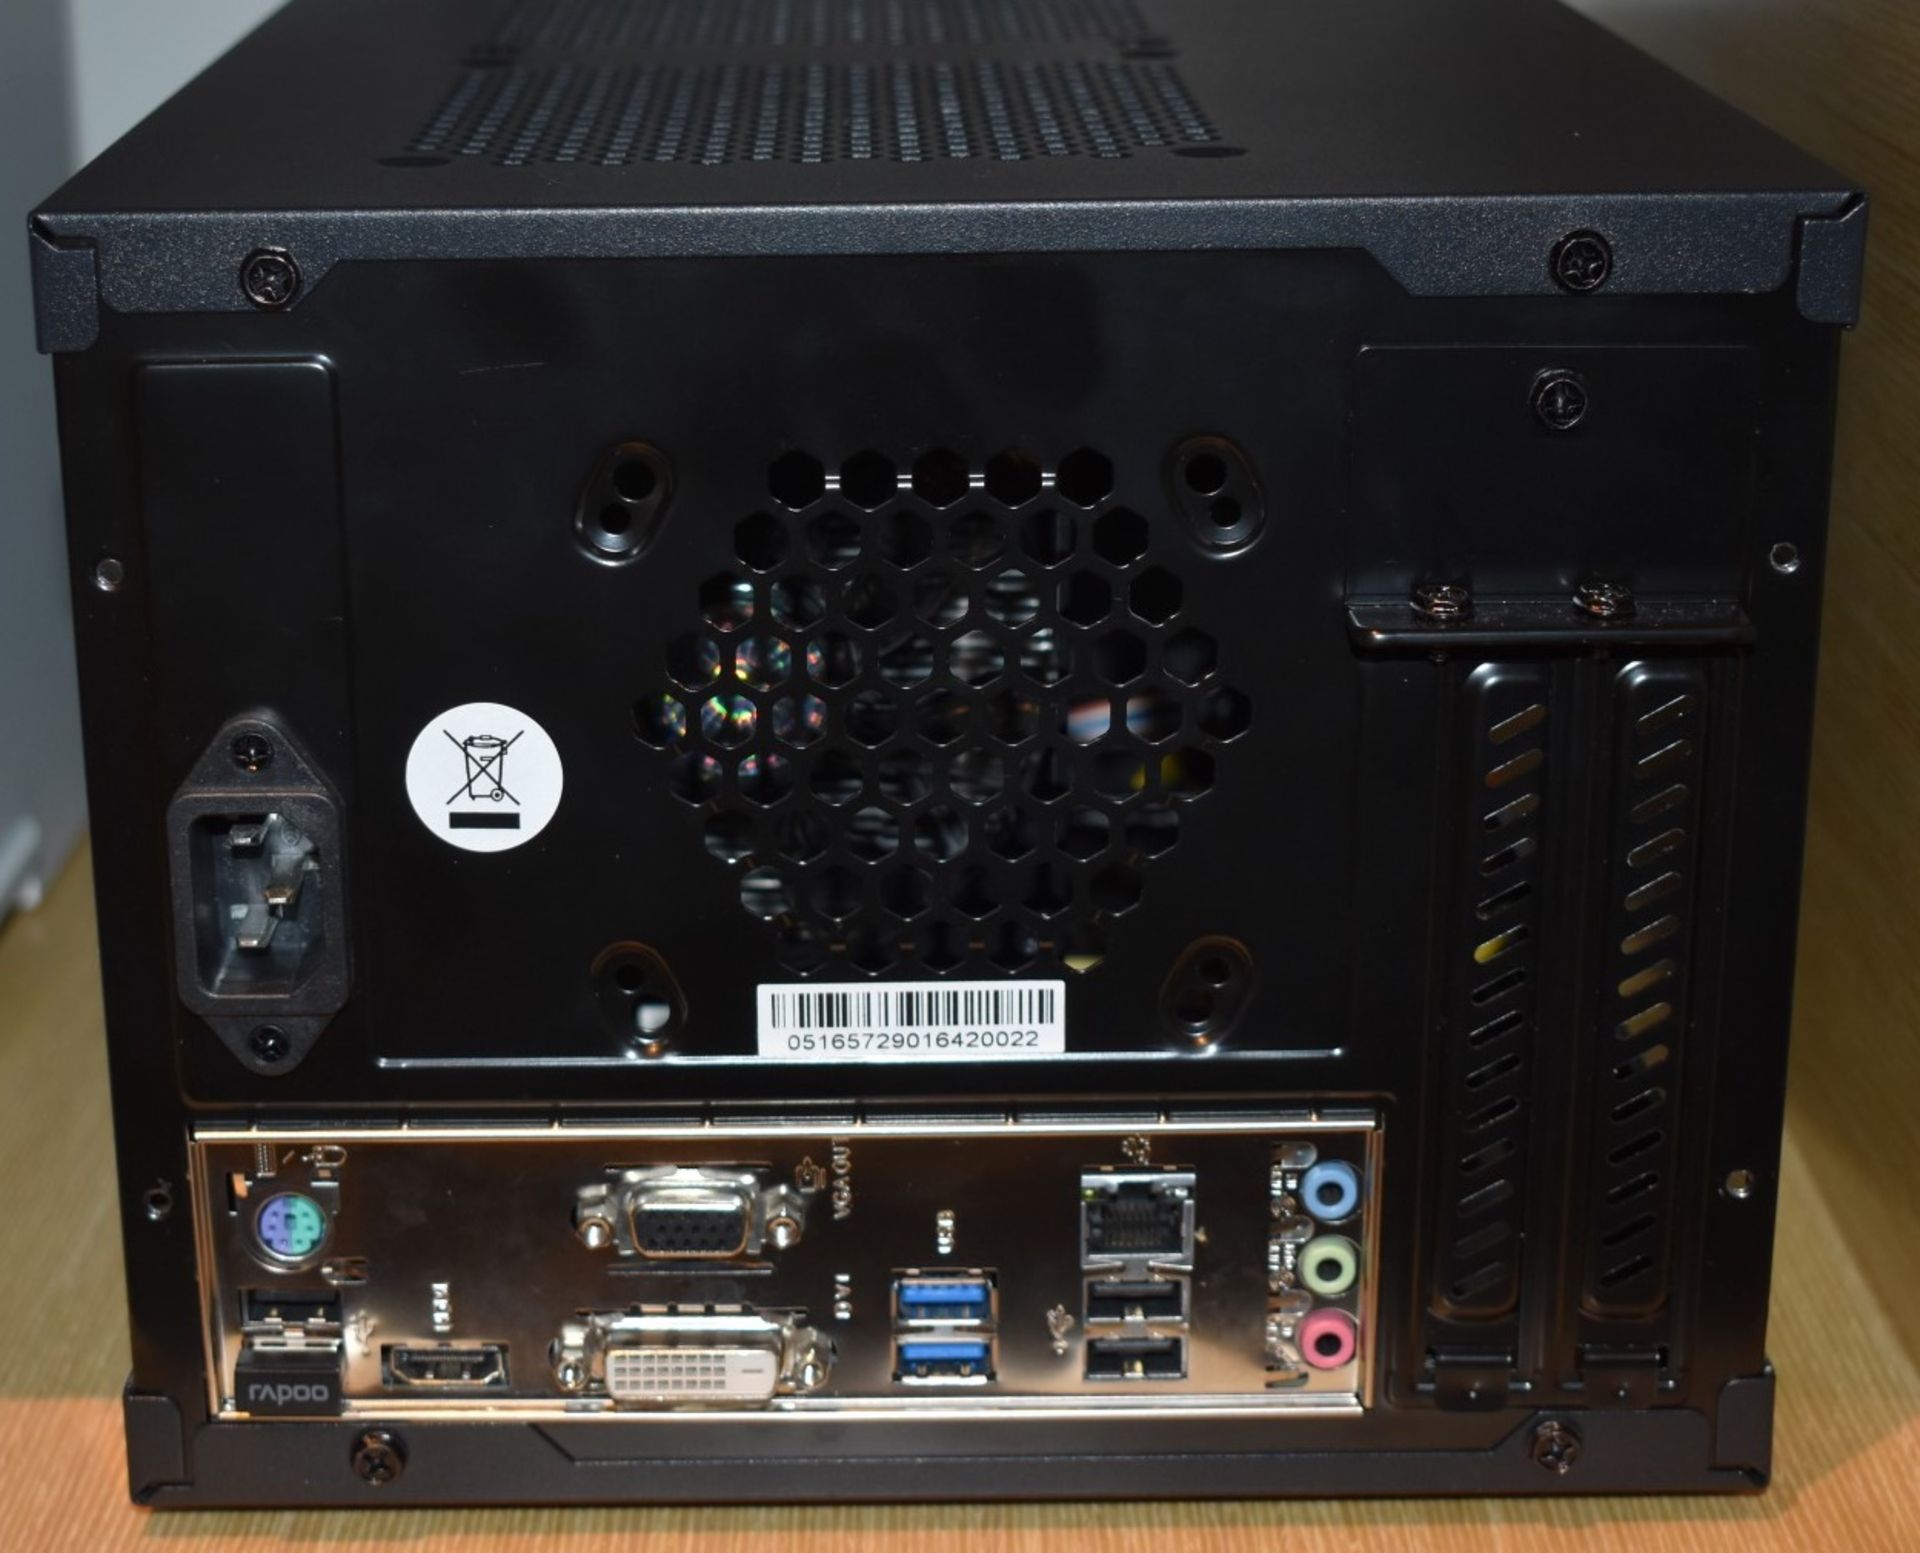 1 x Mini ITX Computer in Sharkroon PC Case - Features an Intel I5-4590T 3ghz Quad Core Processor, - Image 3 of 3